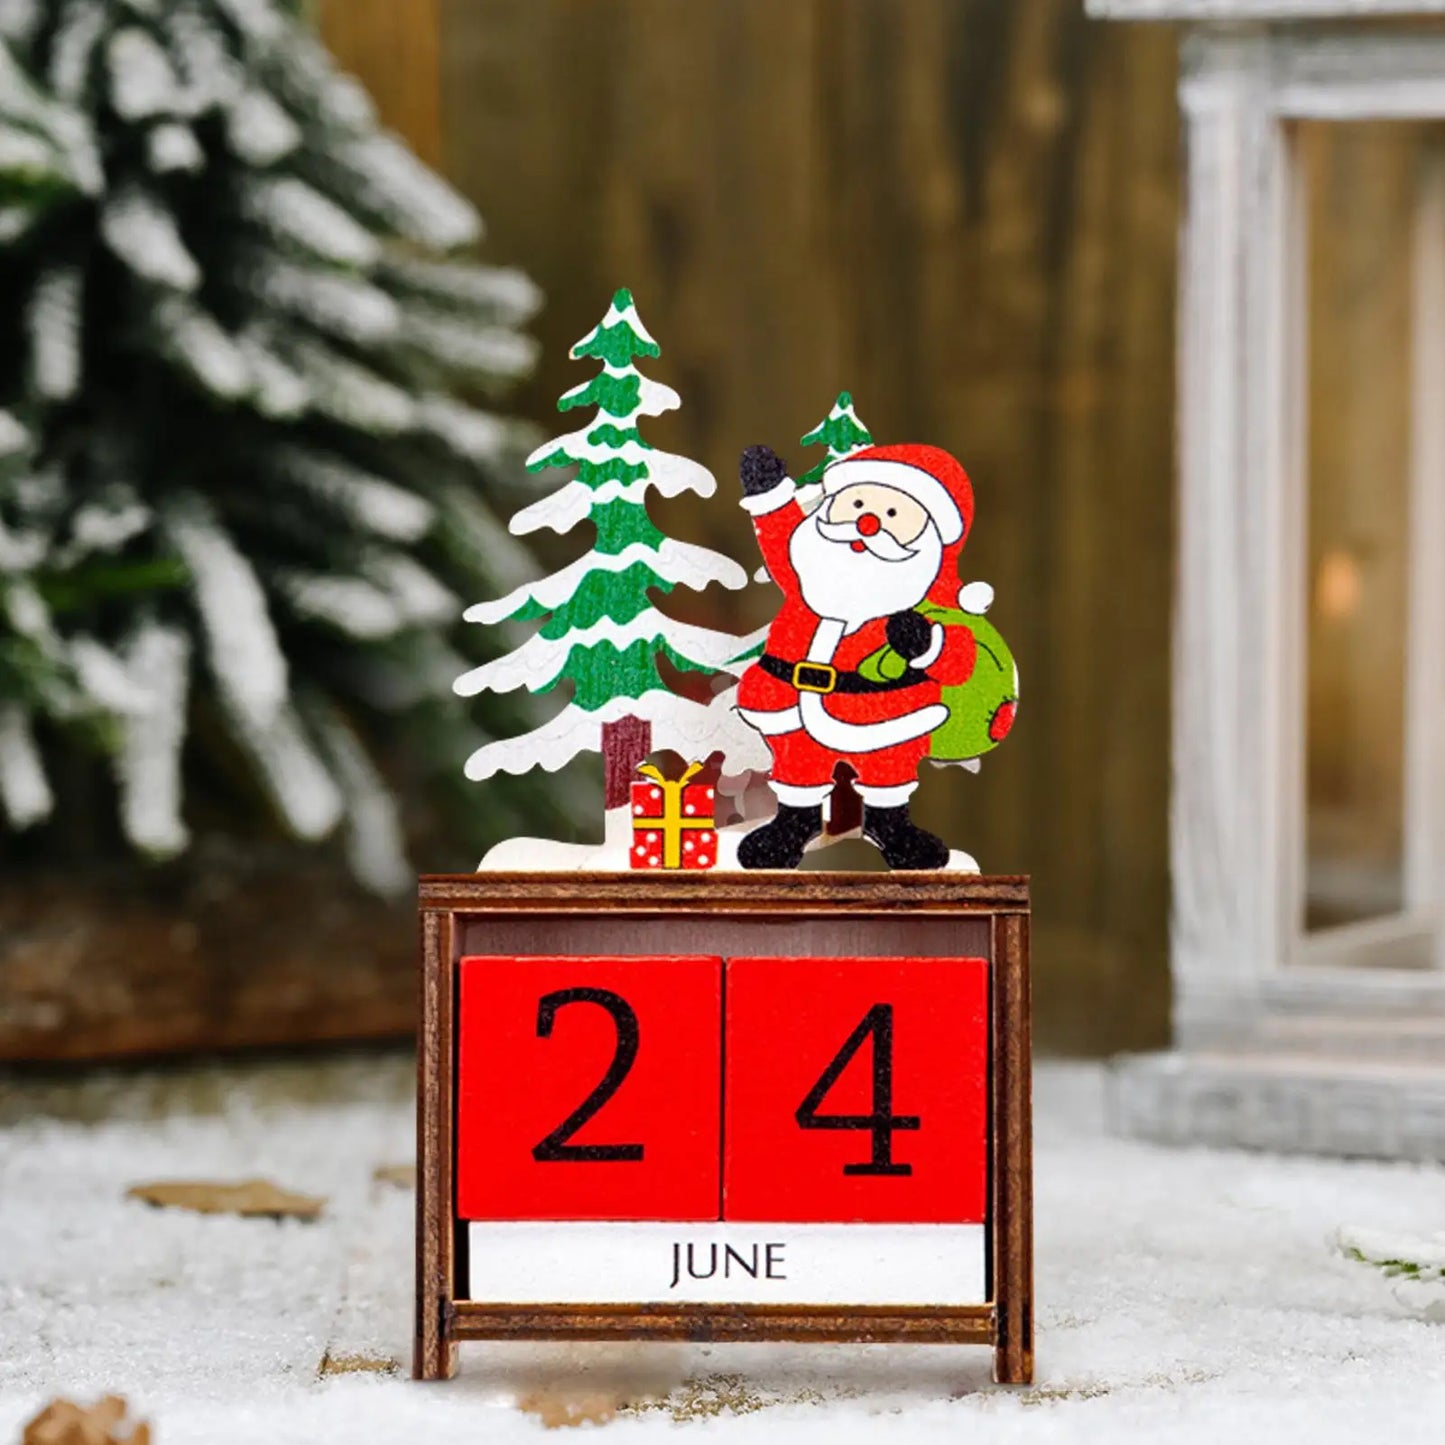 Christmas Countdown Calendar Wooden Painted Santa Calendar Christmas Decoration Advent Calendar Party Table Decorations